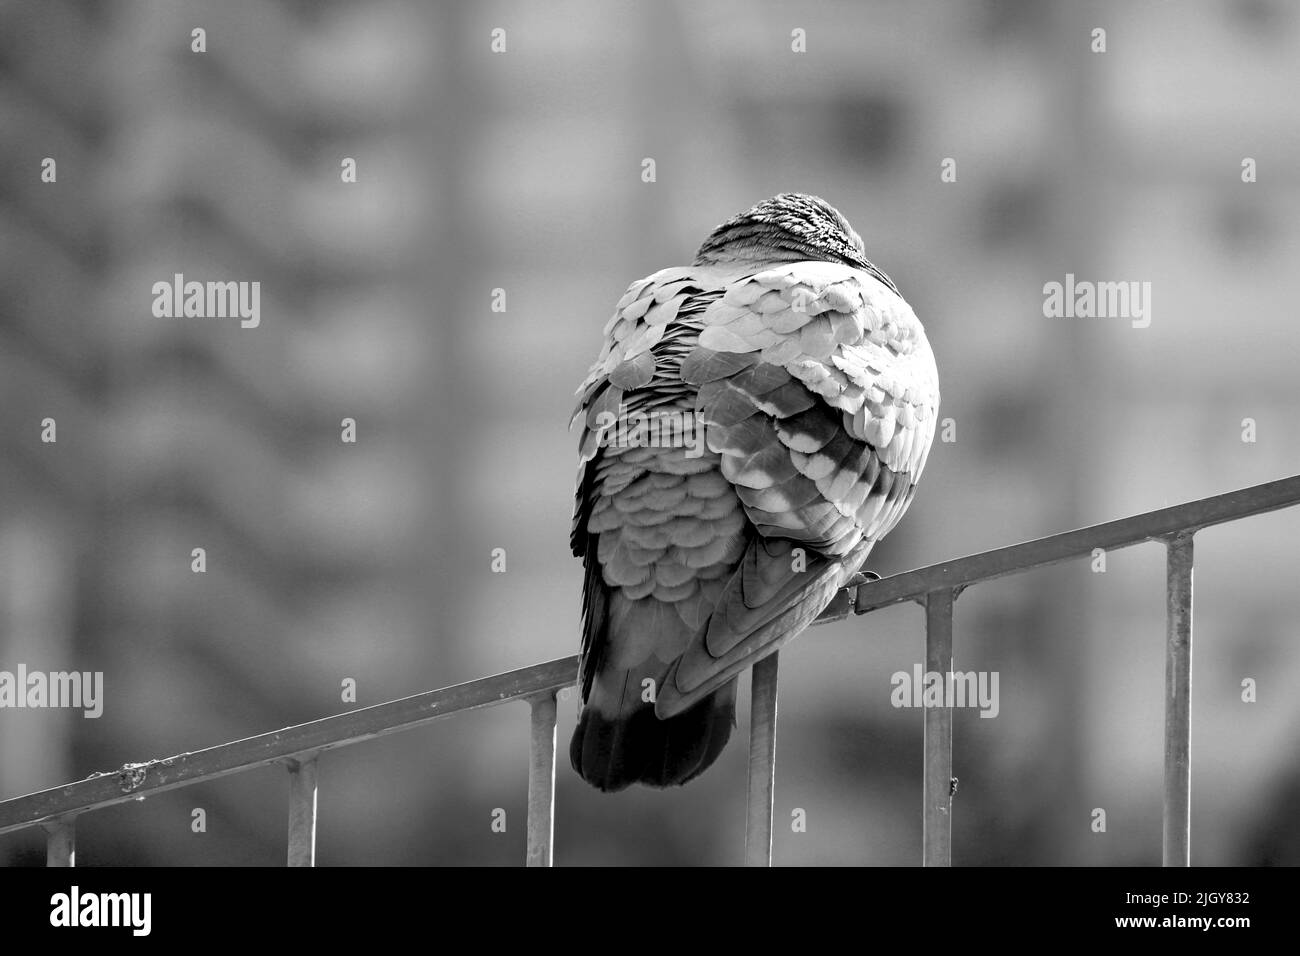 The back of a pigeon on the railing of the stairs that inflates its wings and withstands the cold of winter Stock Photo